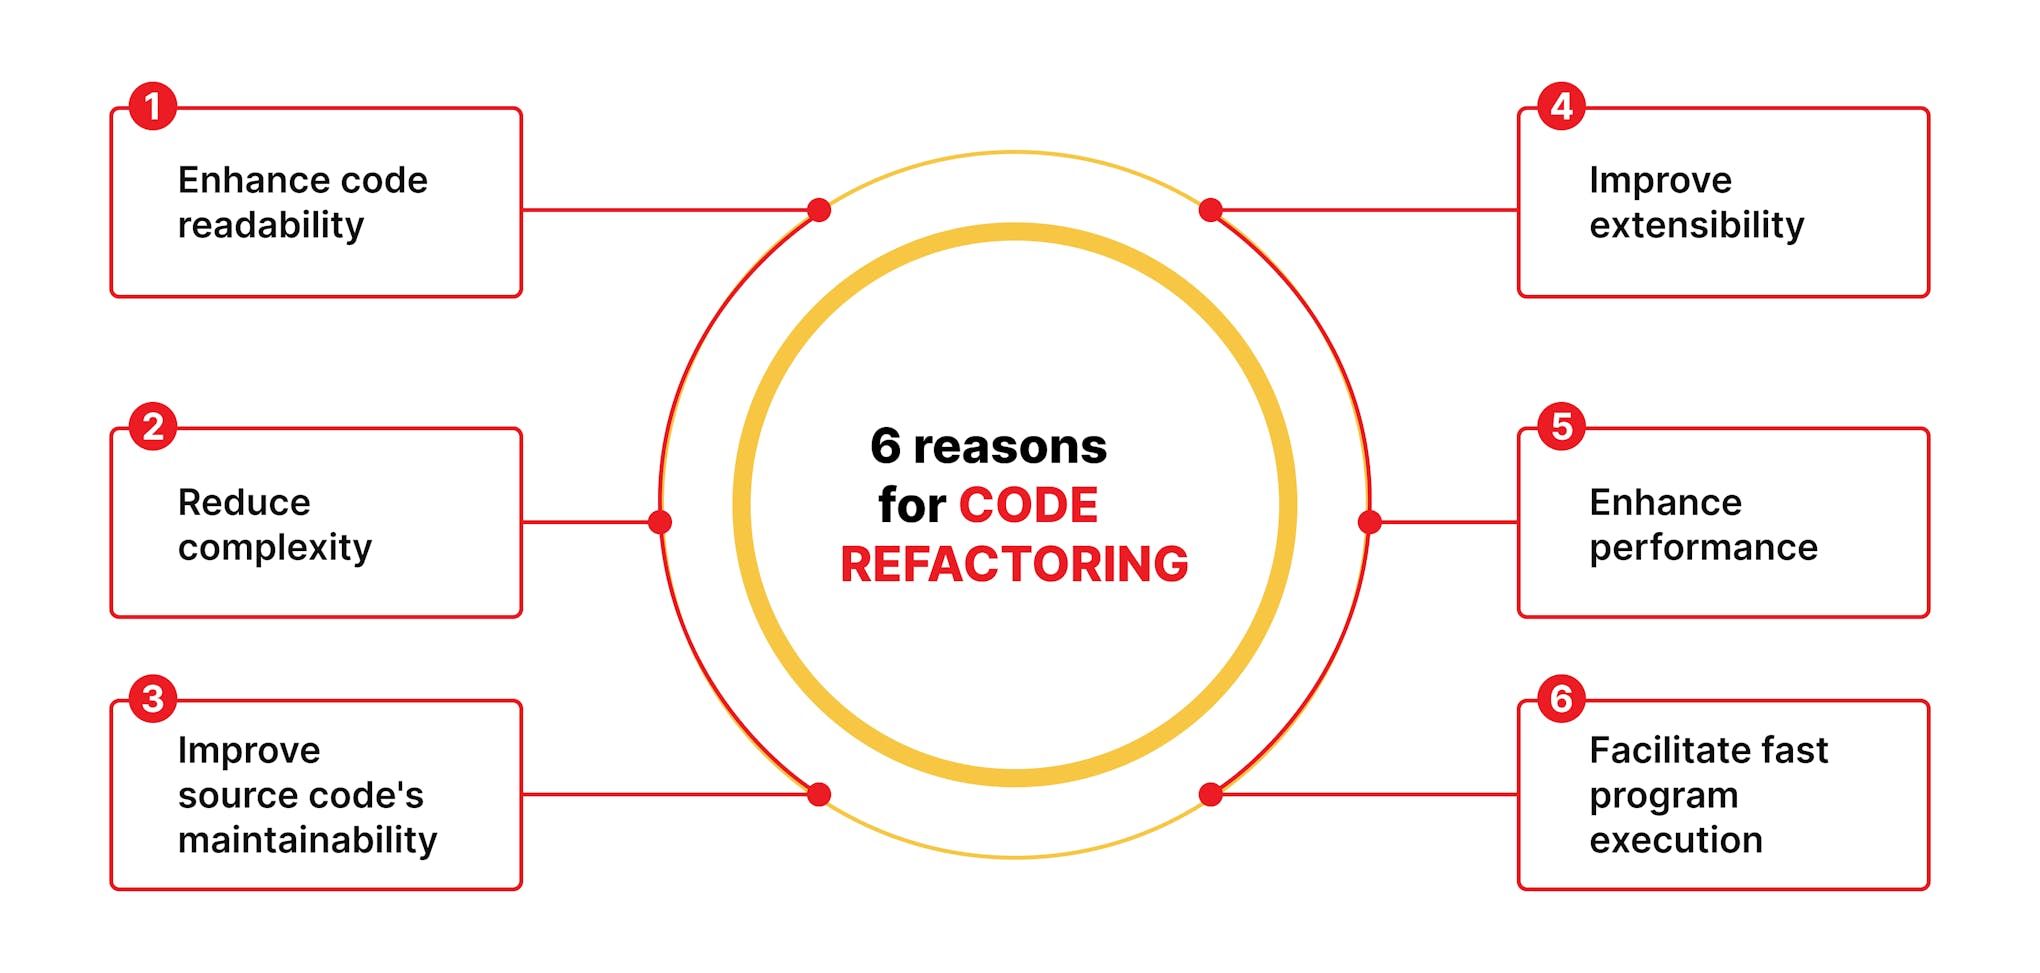 Reasons for code refactoring.